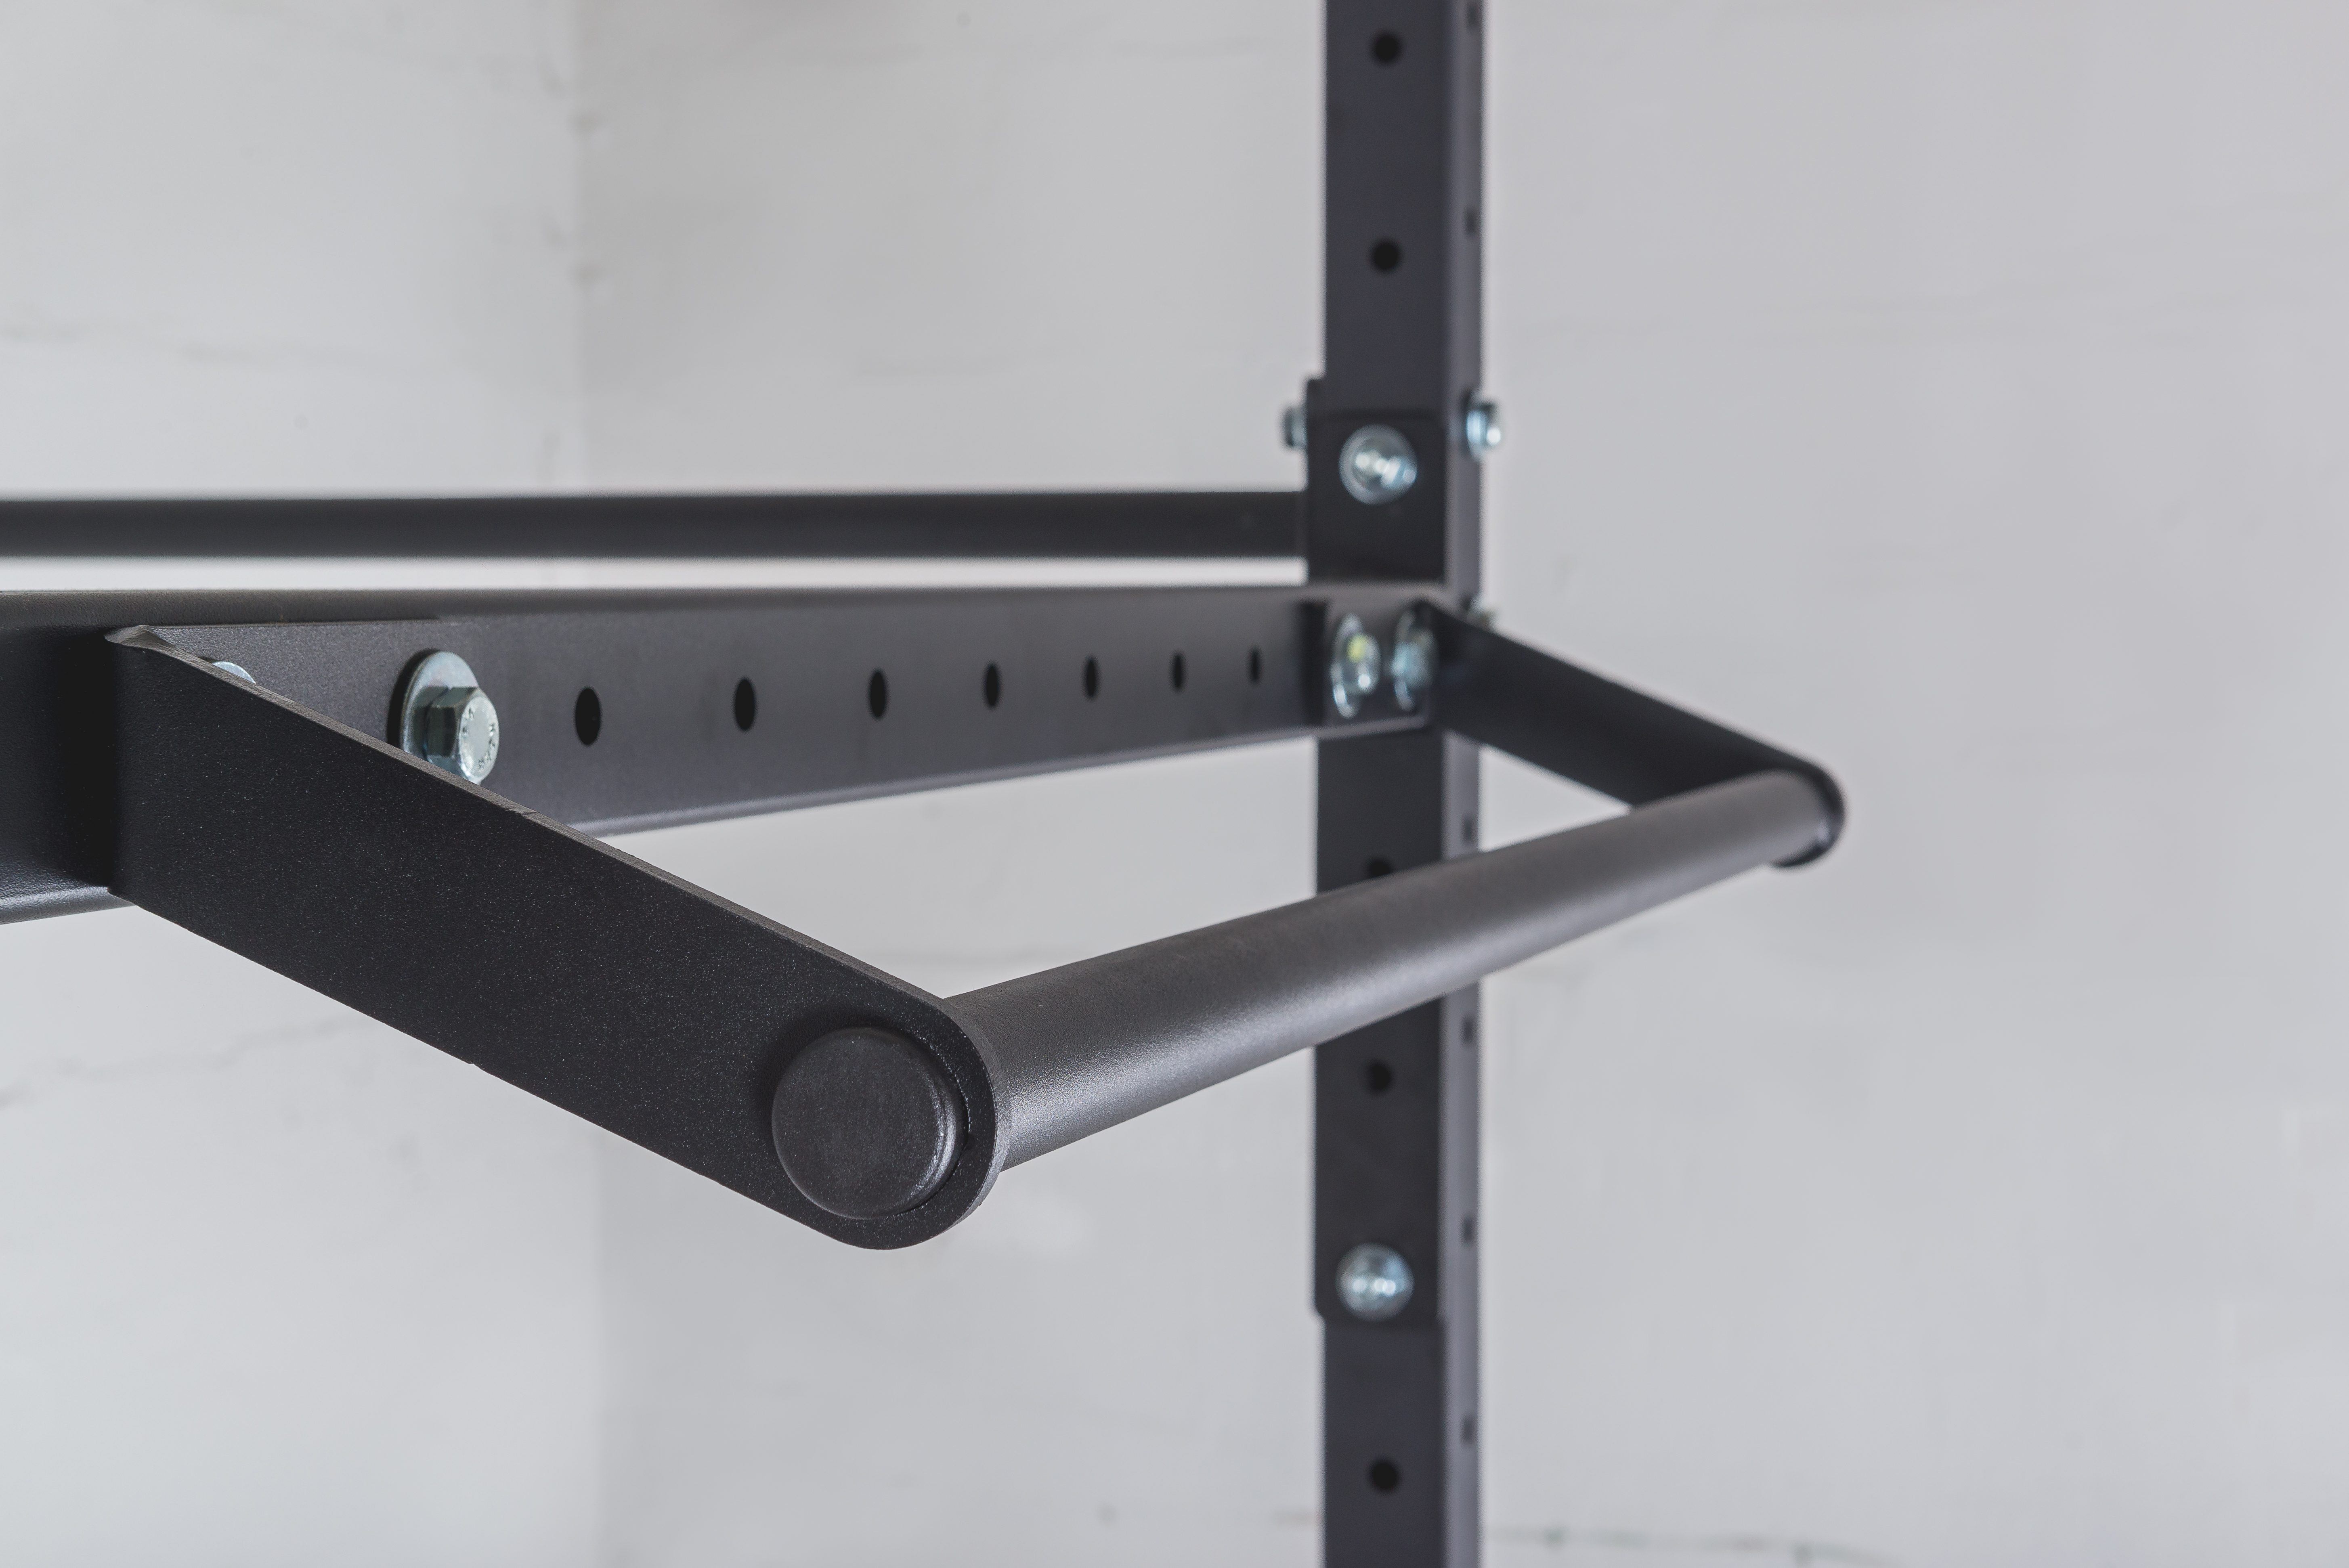 Kingsbox Face Mount Pull Up Bar – Mighty